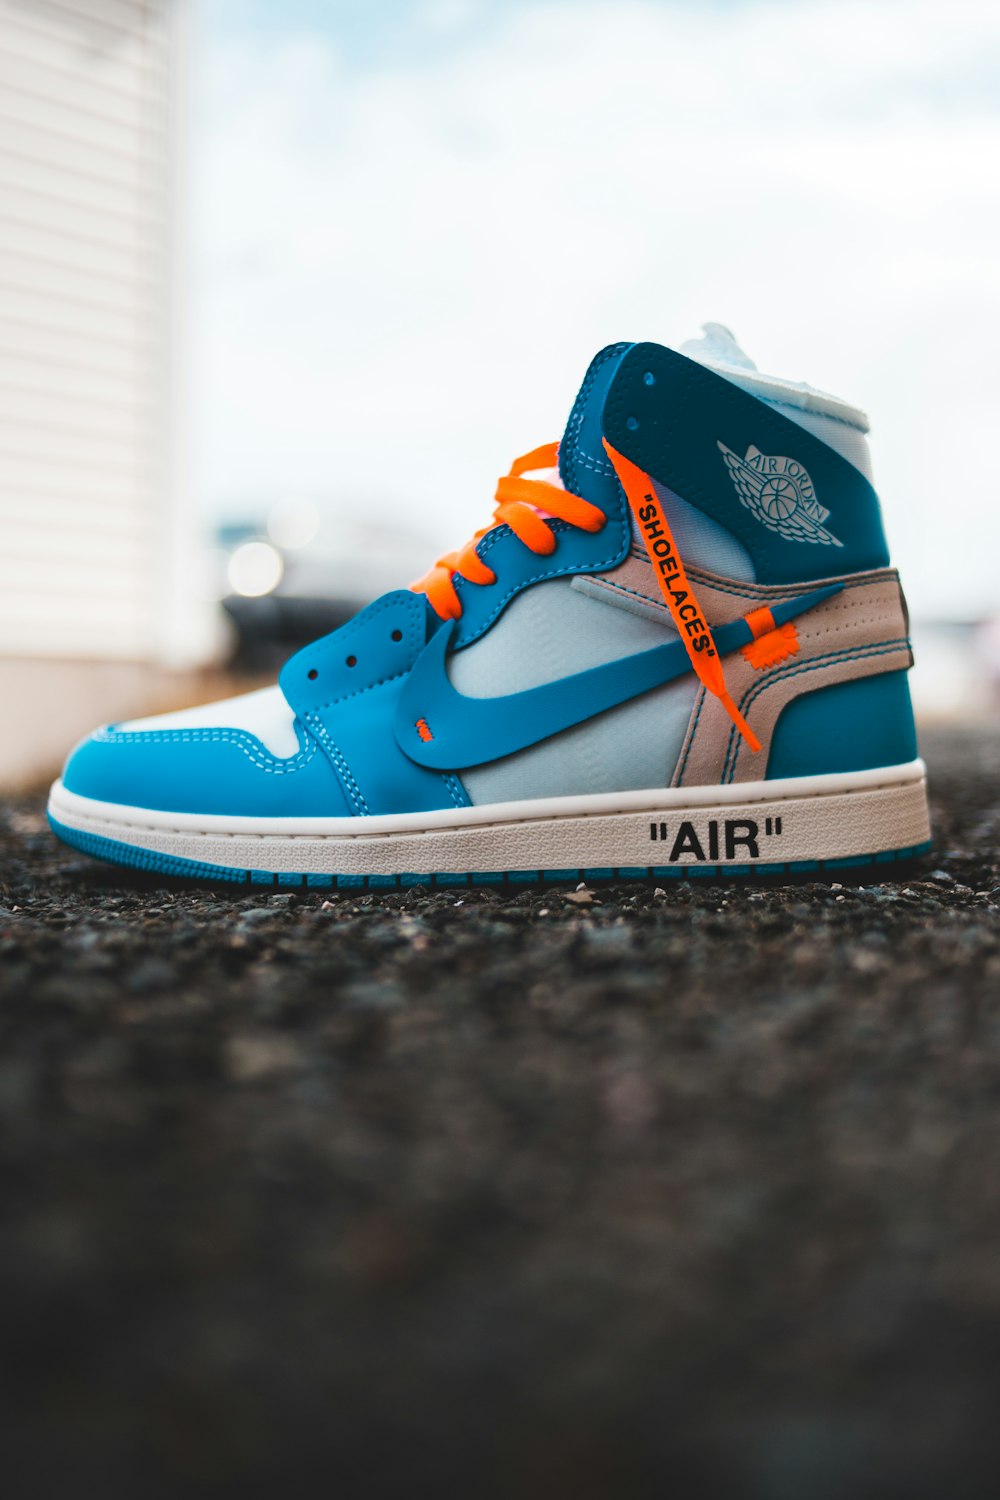 Blue and orange nike high top sneakers photo – Free Apparel Image on  Unsplash